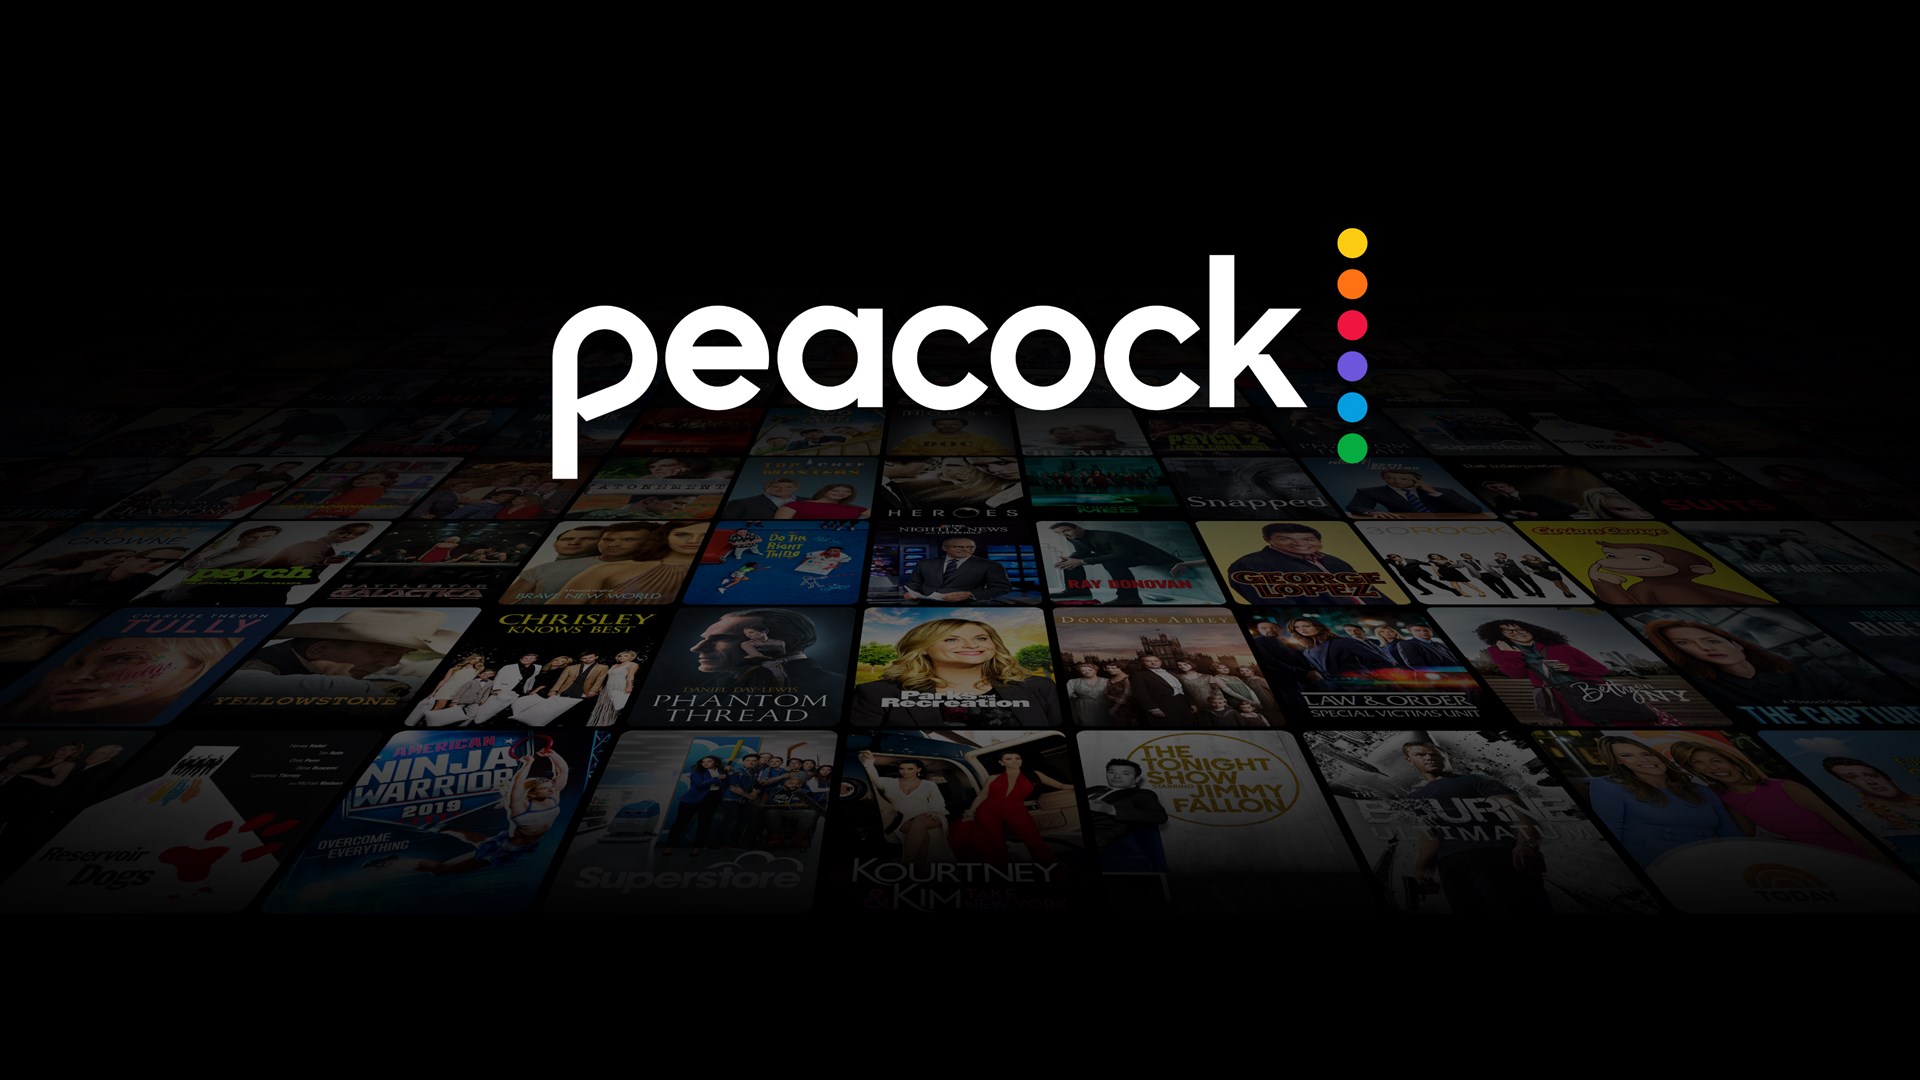 Best Peacock Deals: 67% off Your First Year and More